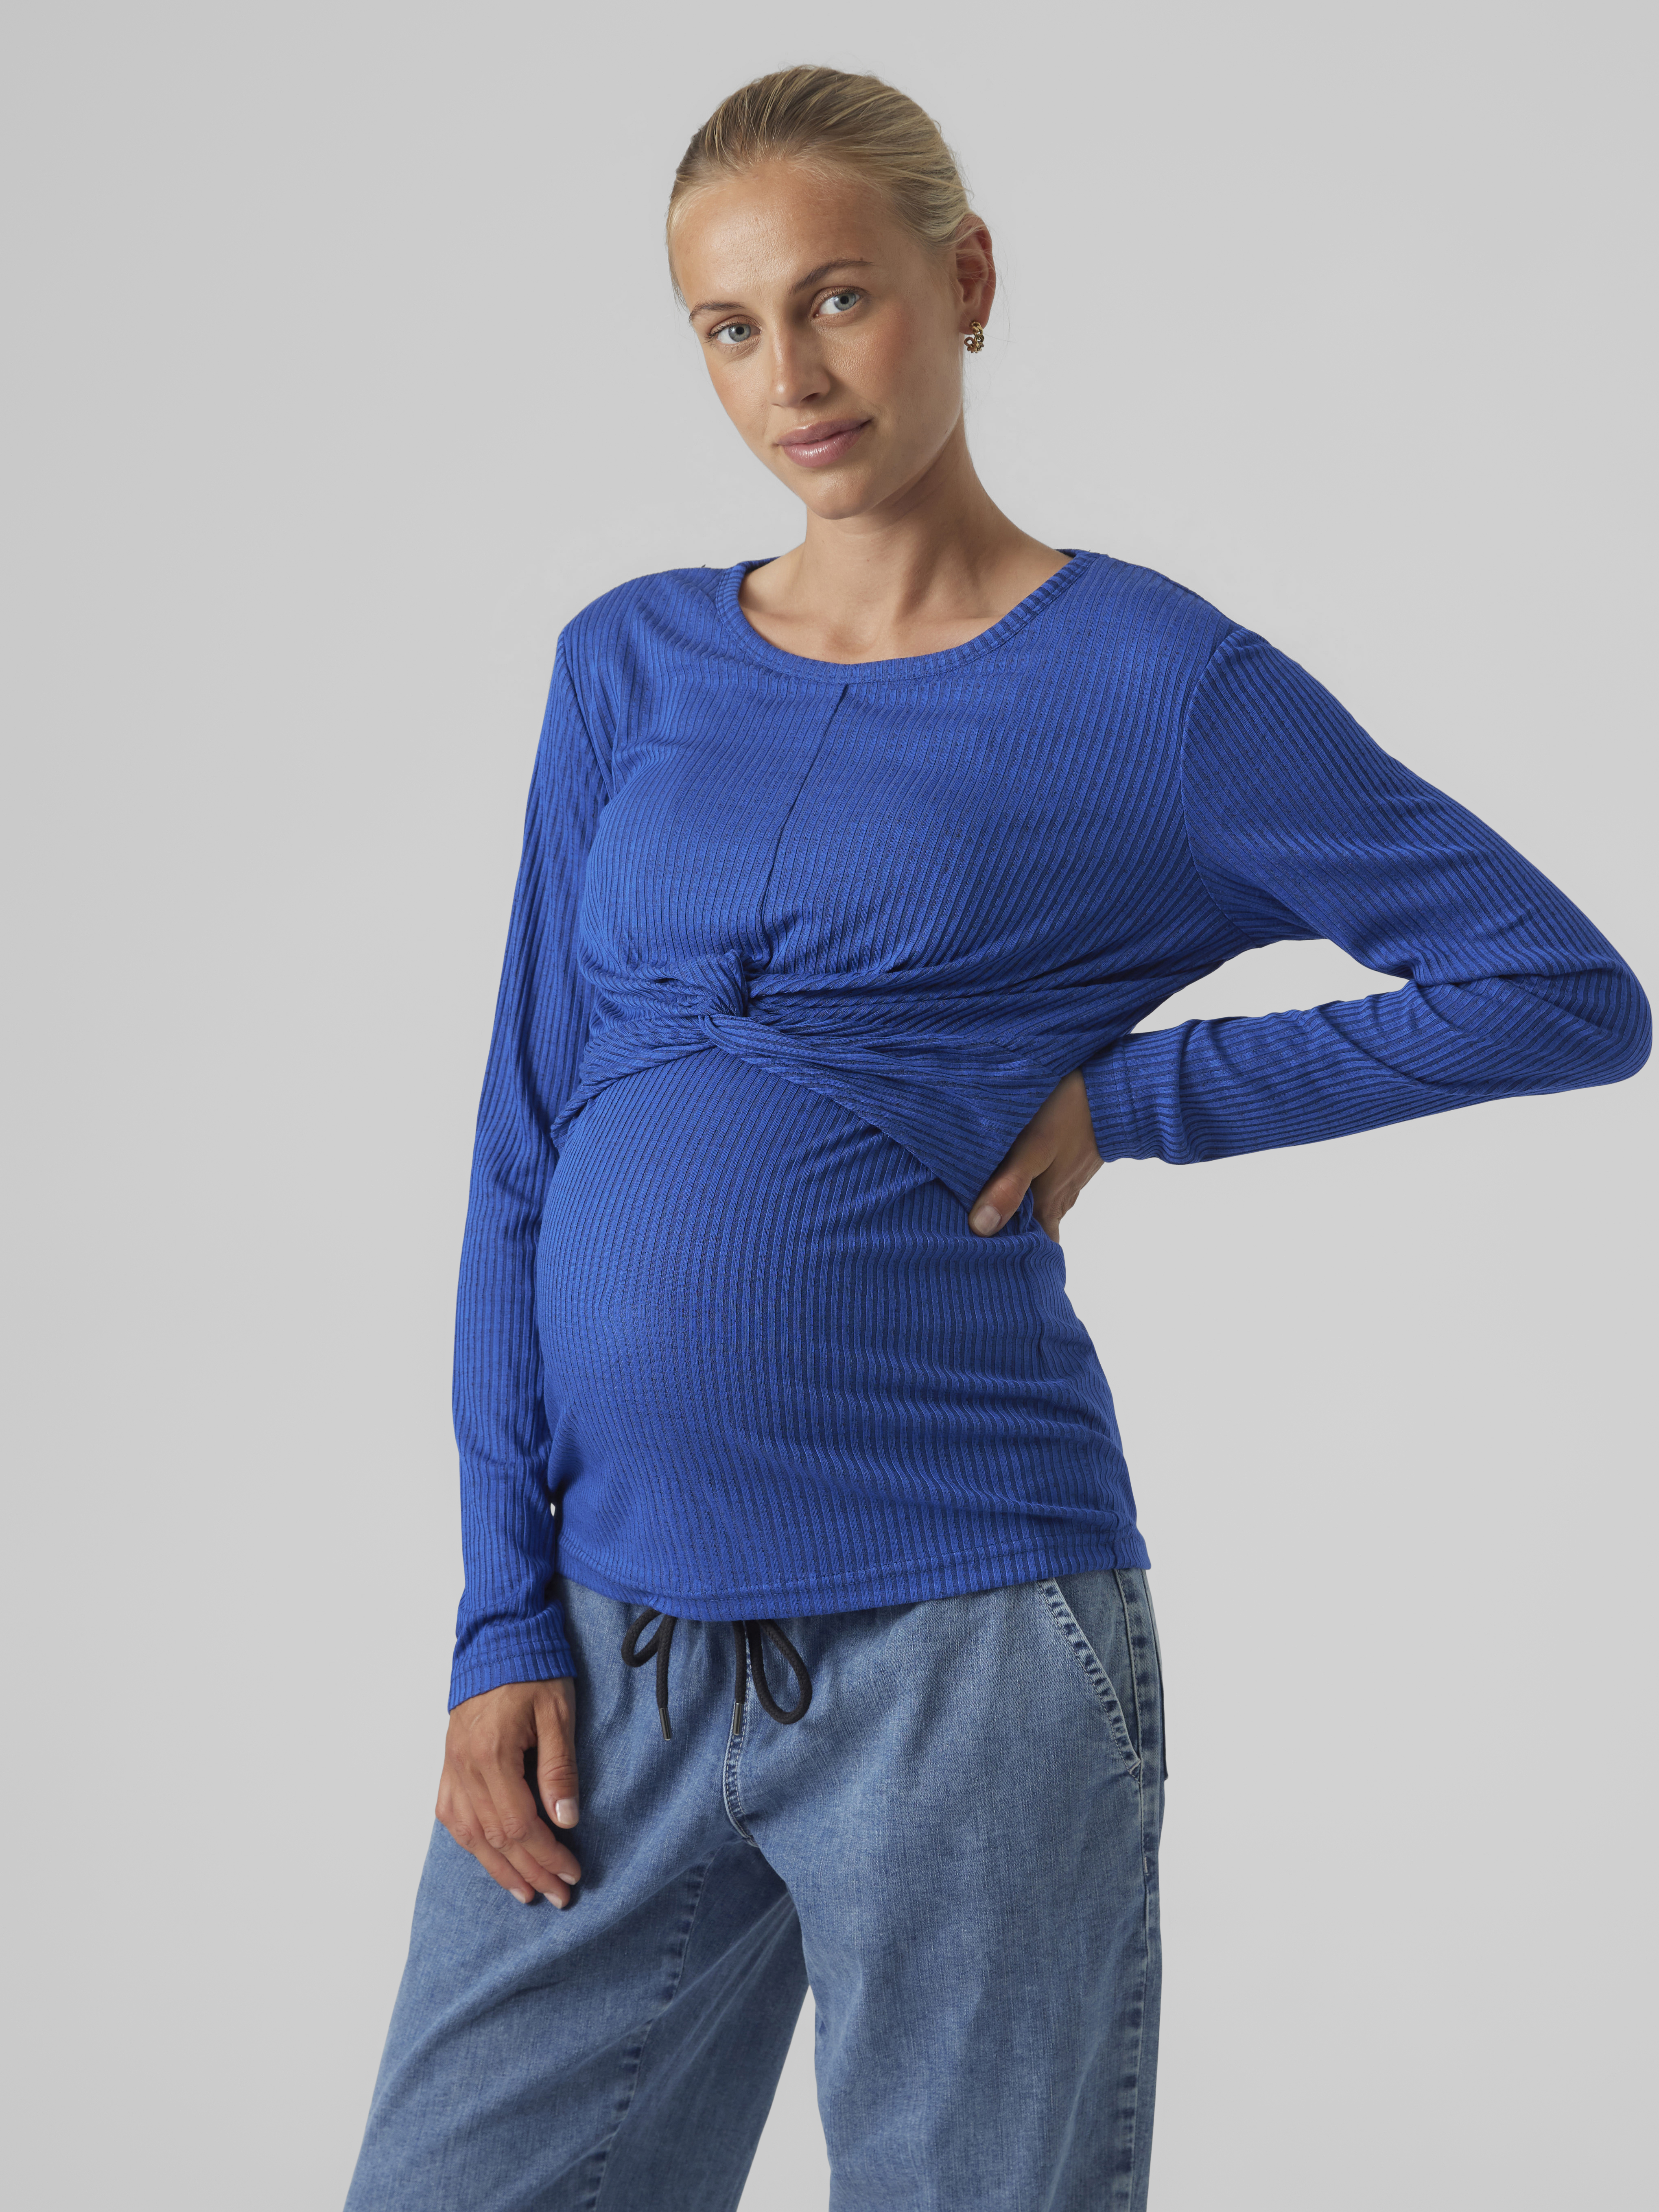 MAMA.LICIOUS Maternity-top  -Beaucoup Blue - 20012985